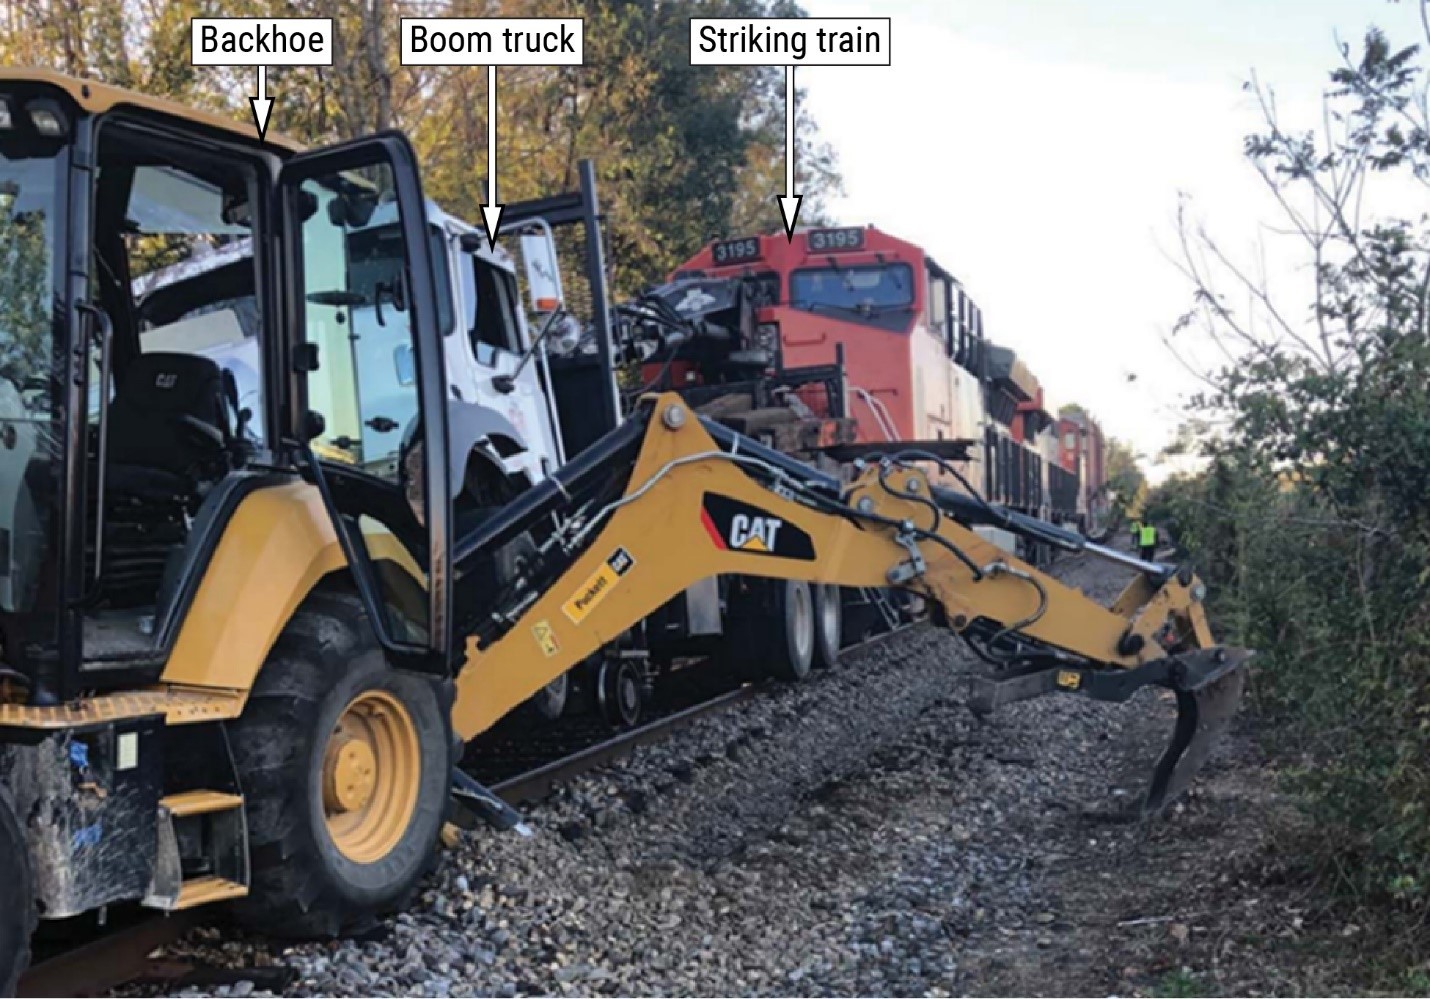  On-track maintenance equipment and striking train after the collision